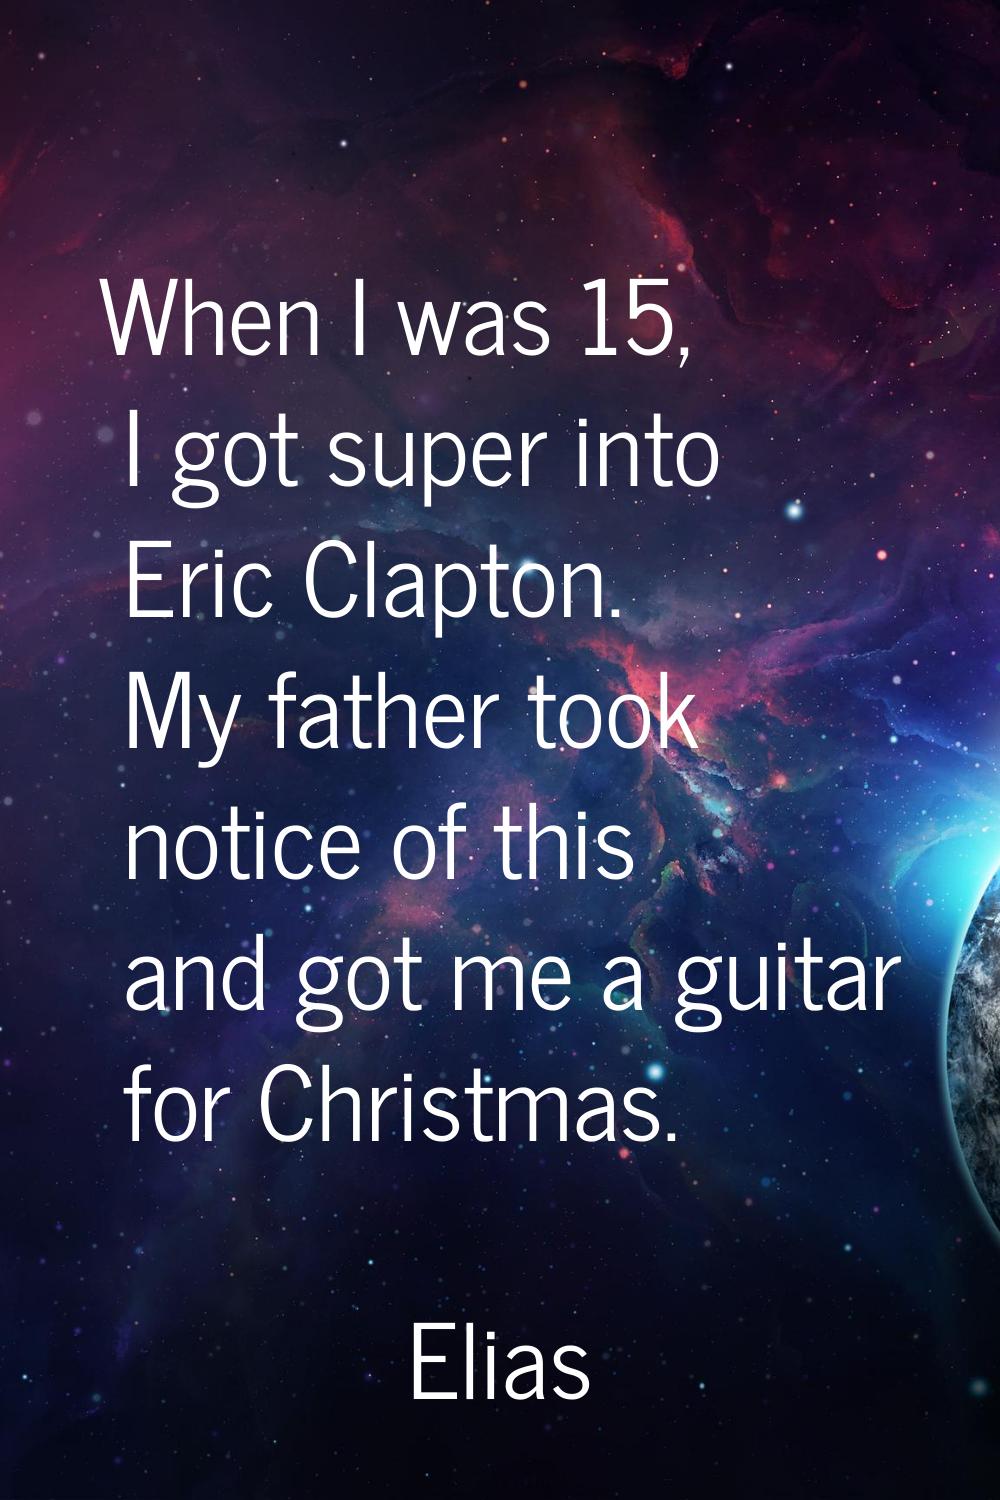 When I was 15, I got super into Eric Clapton. My father took notice of this and got me a guitar for